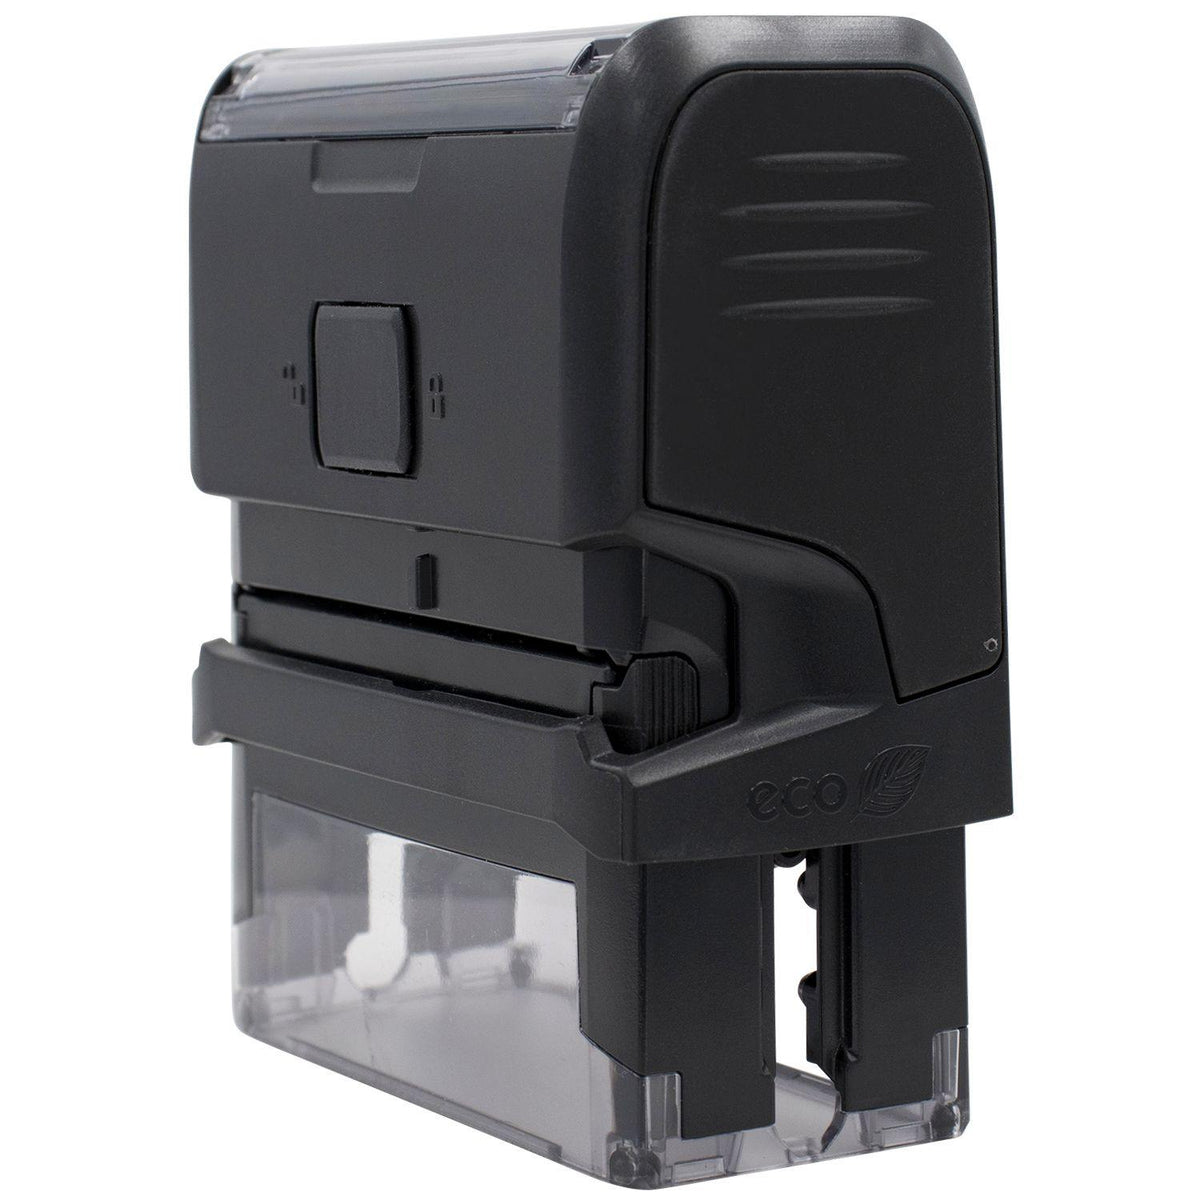 Self-Inking Contact Tracing Stamp - Engineer Seal Stamps - Brand_Trodat, Impression Size_Small, Stamp Type_Self-Inking Stamp, Type of Use_Medical Office